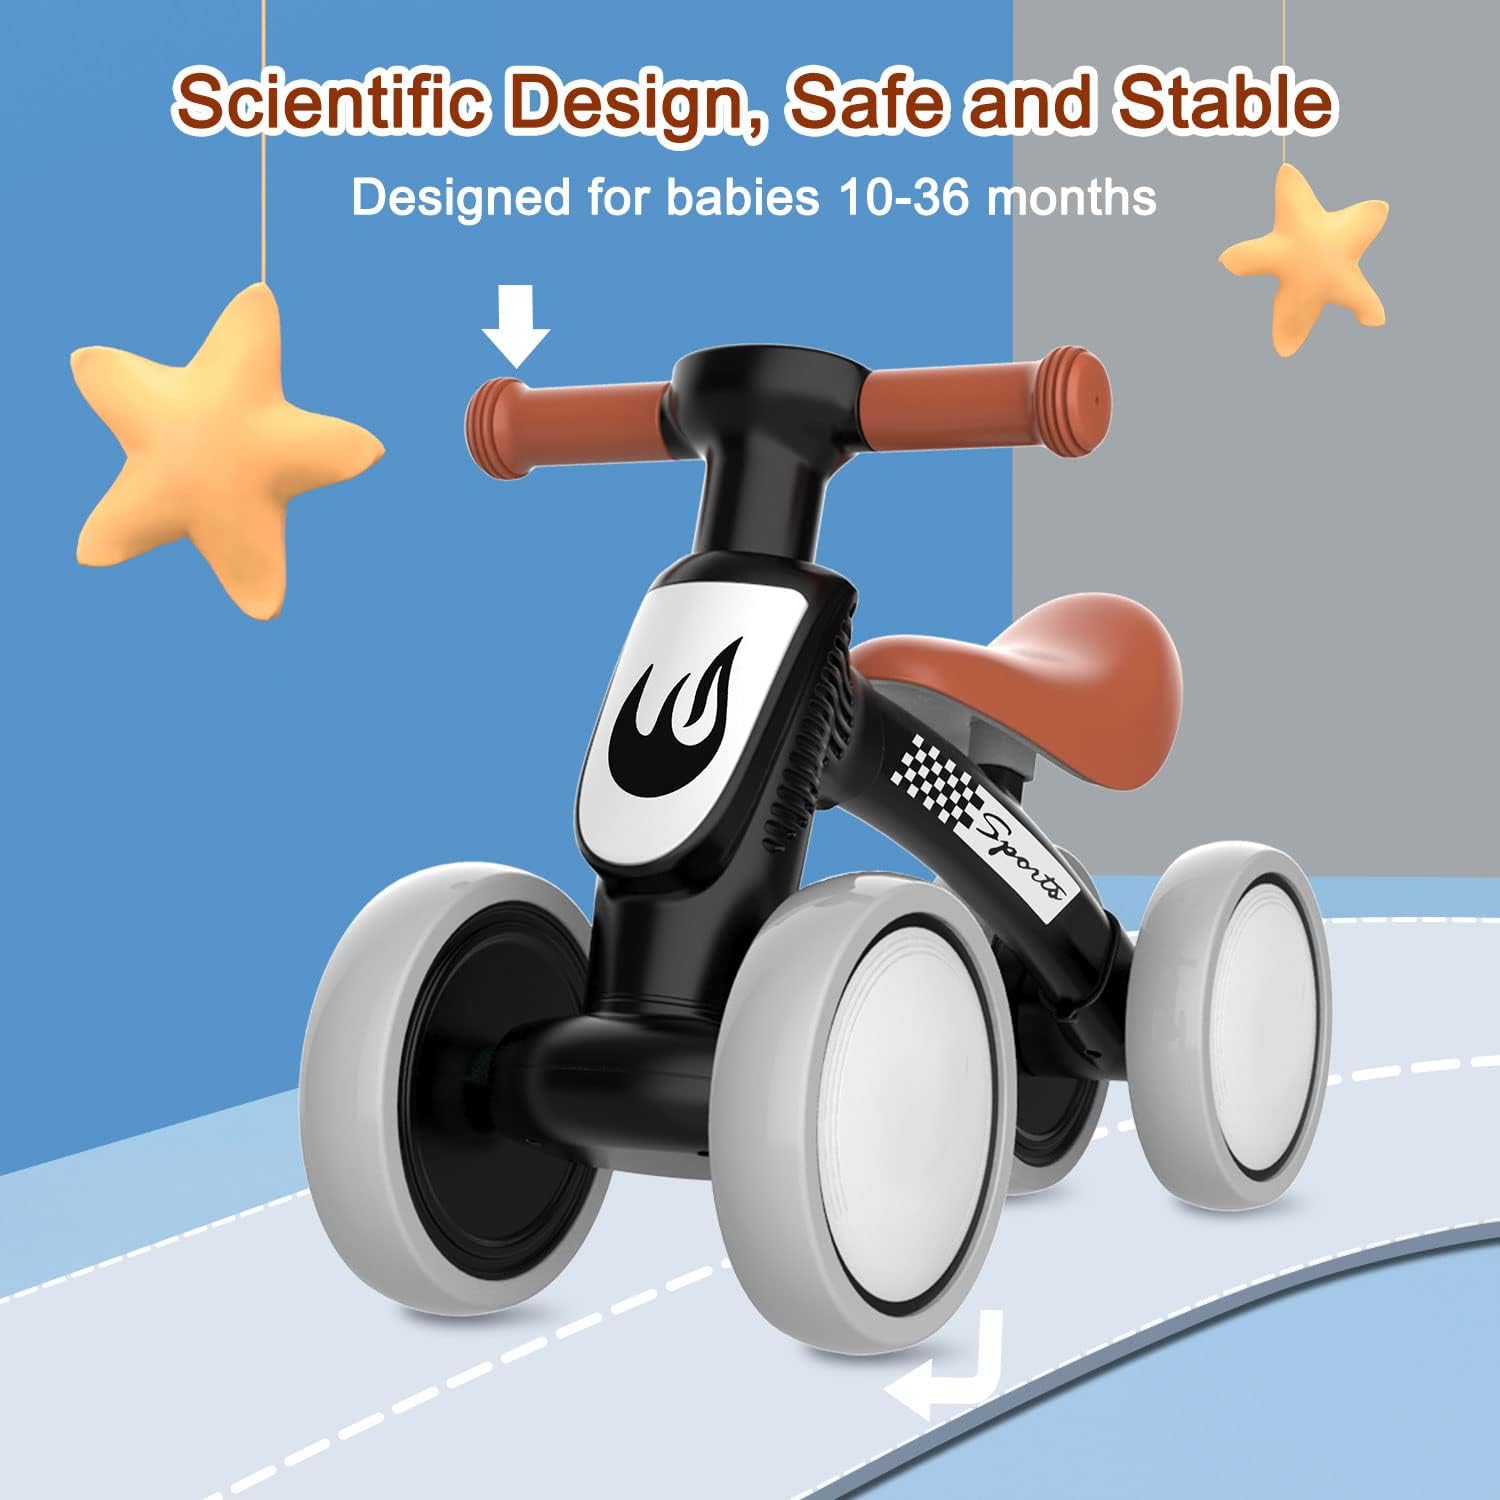 Baby Balance Bike Toys for 1 Year Old Boy Gifts, 10-36 Month Toddler Balance Bike, No Pedal 4 Silence Wheels & Soft Seat Pre-School First Riding Toys, 1st Birthday Gifts.